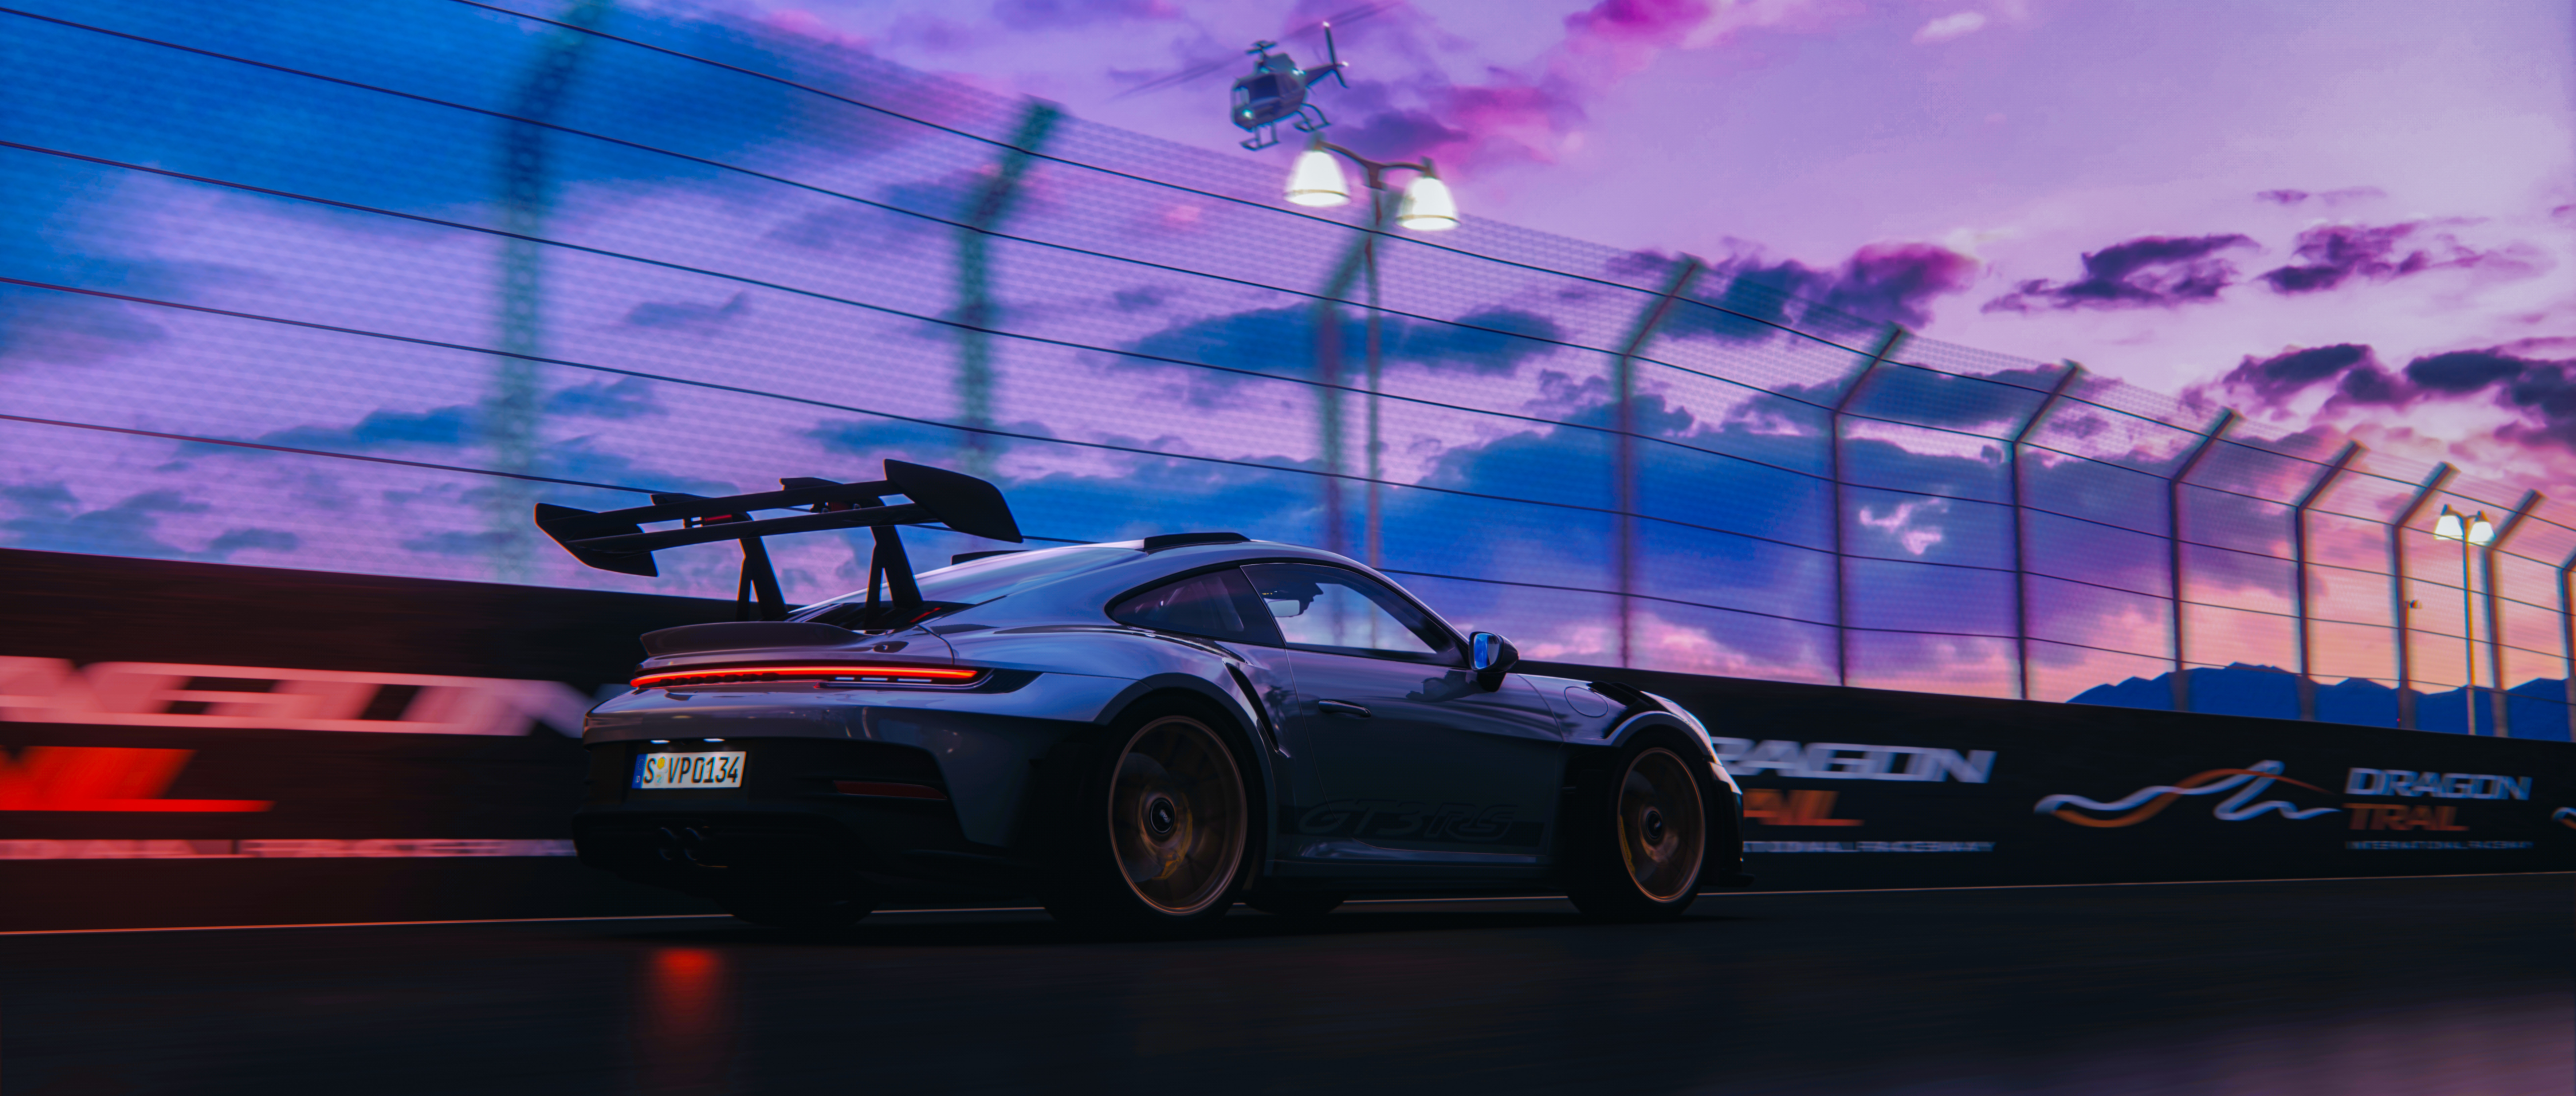 General 7680x3269 Assetto Corsa PC gaming car digital art fence Porsche 911 gt3rs clouds rear view taillights vehicle motion blur sunset sunset glow driving licence plates video game art helicopters video games race tracks